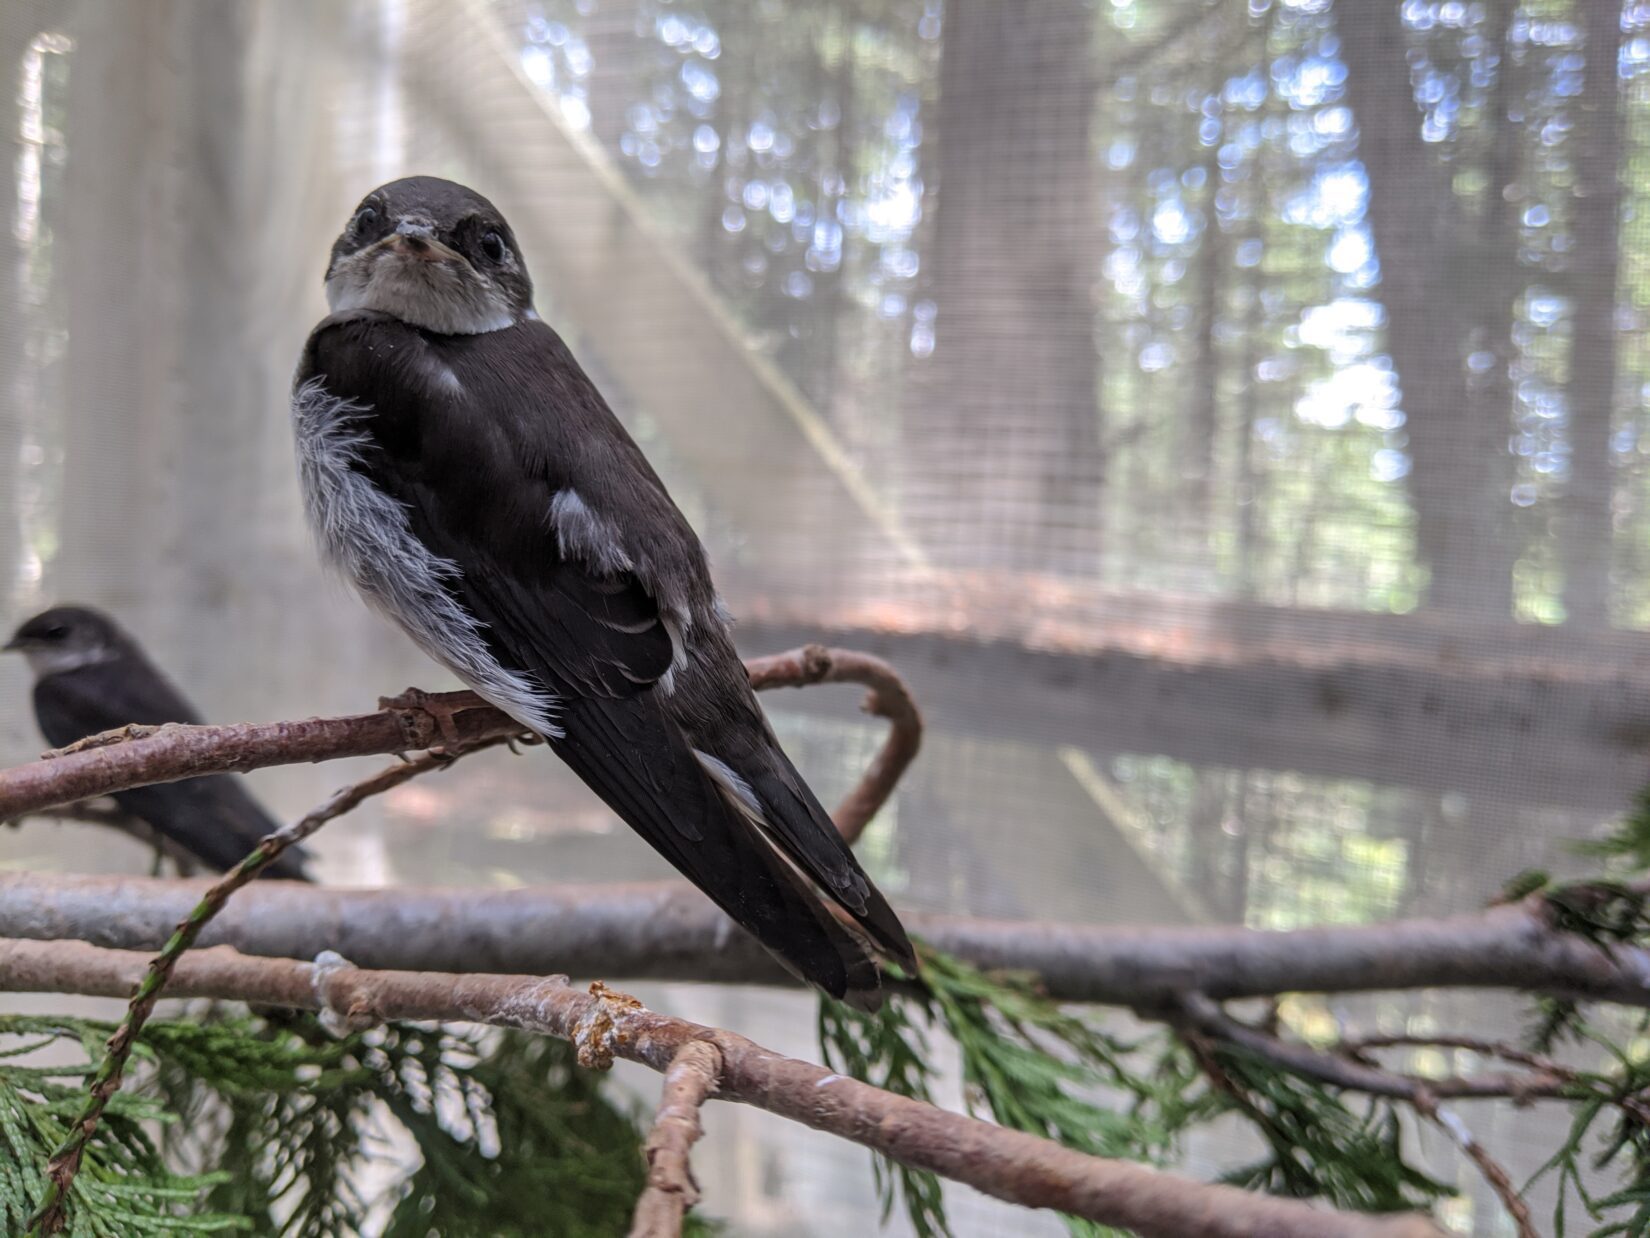 Swallow perched on a cedar branch in a screened enclosure at Wild ARC